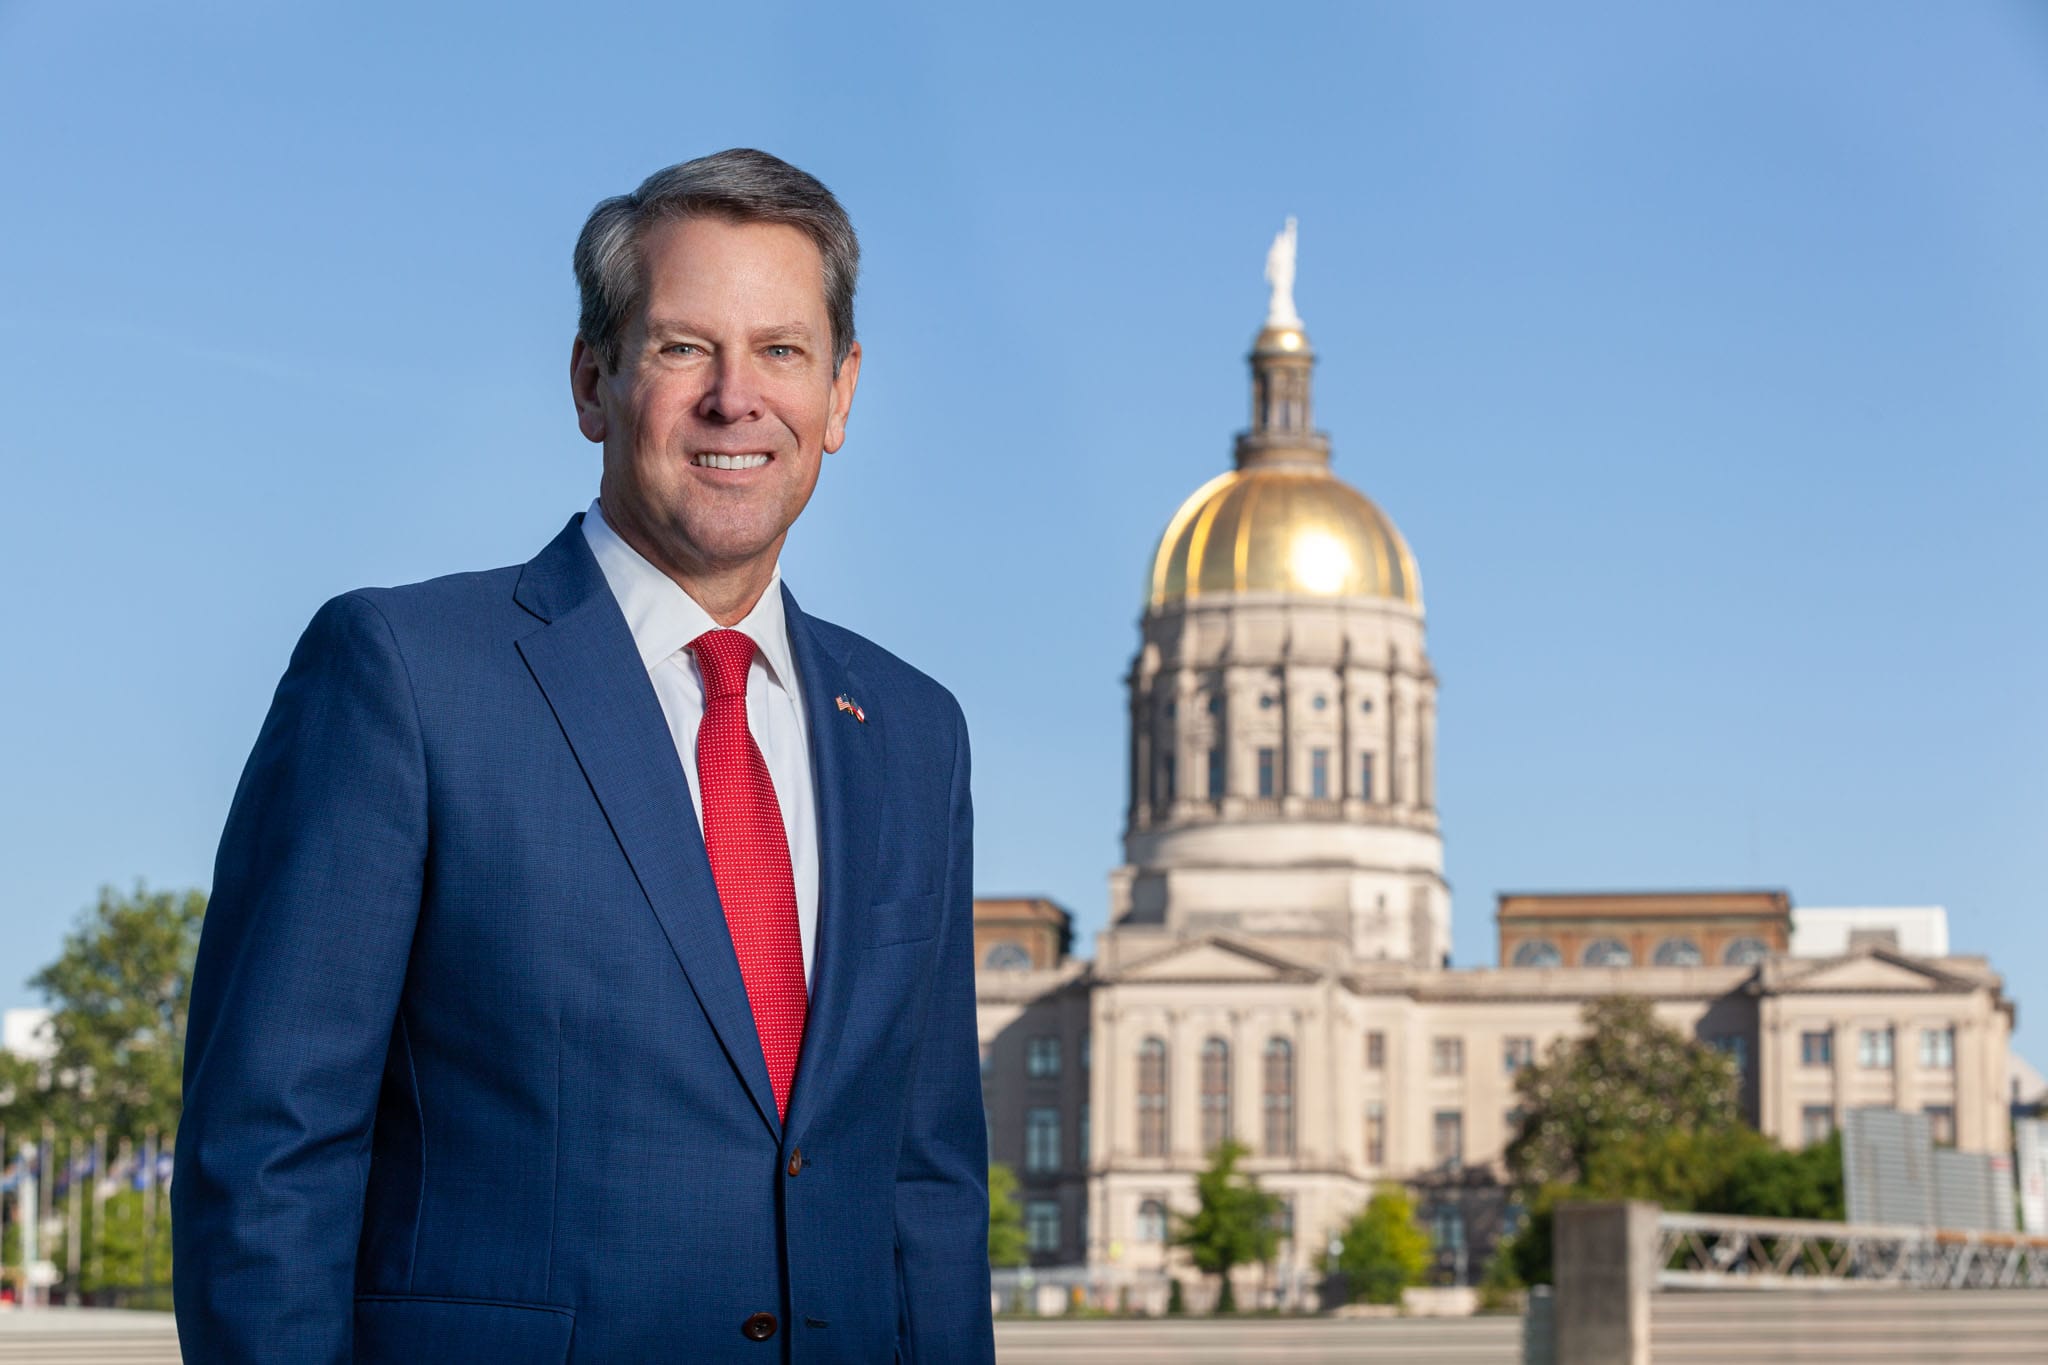 Georgia Governor Brian Kemp standing in front of the Georgia State Capitol.